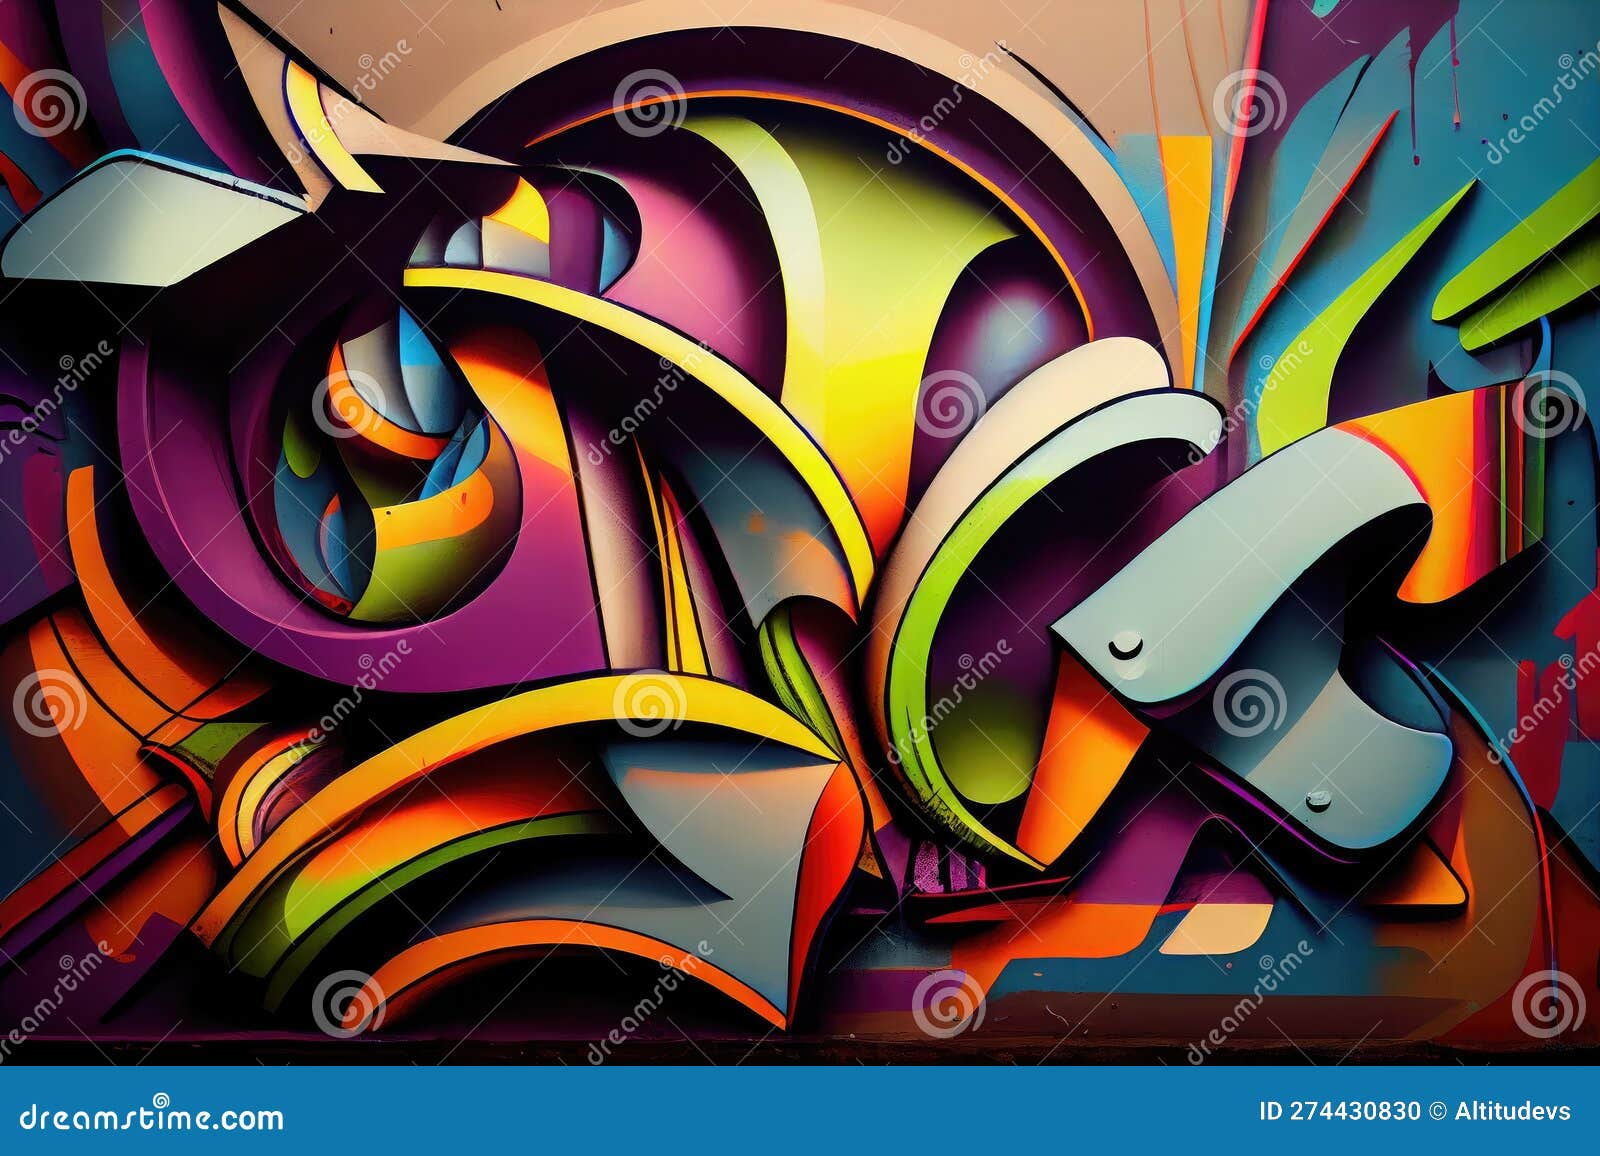 Graffiti Art Featuring Vibrant Colors, Shapes, and Textures Stock ...